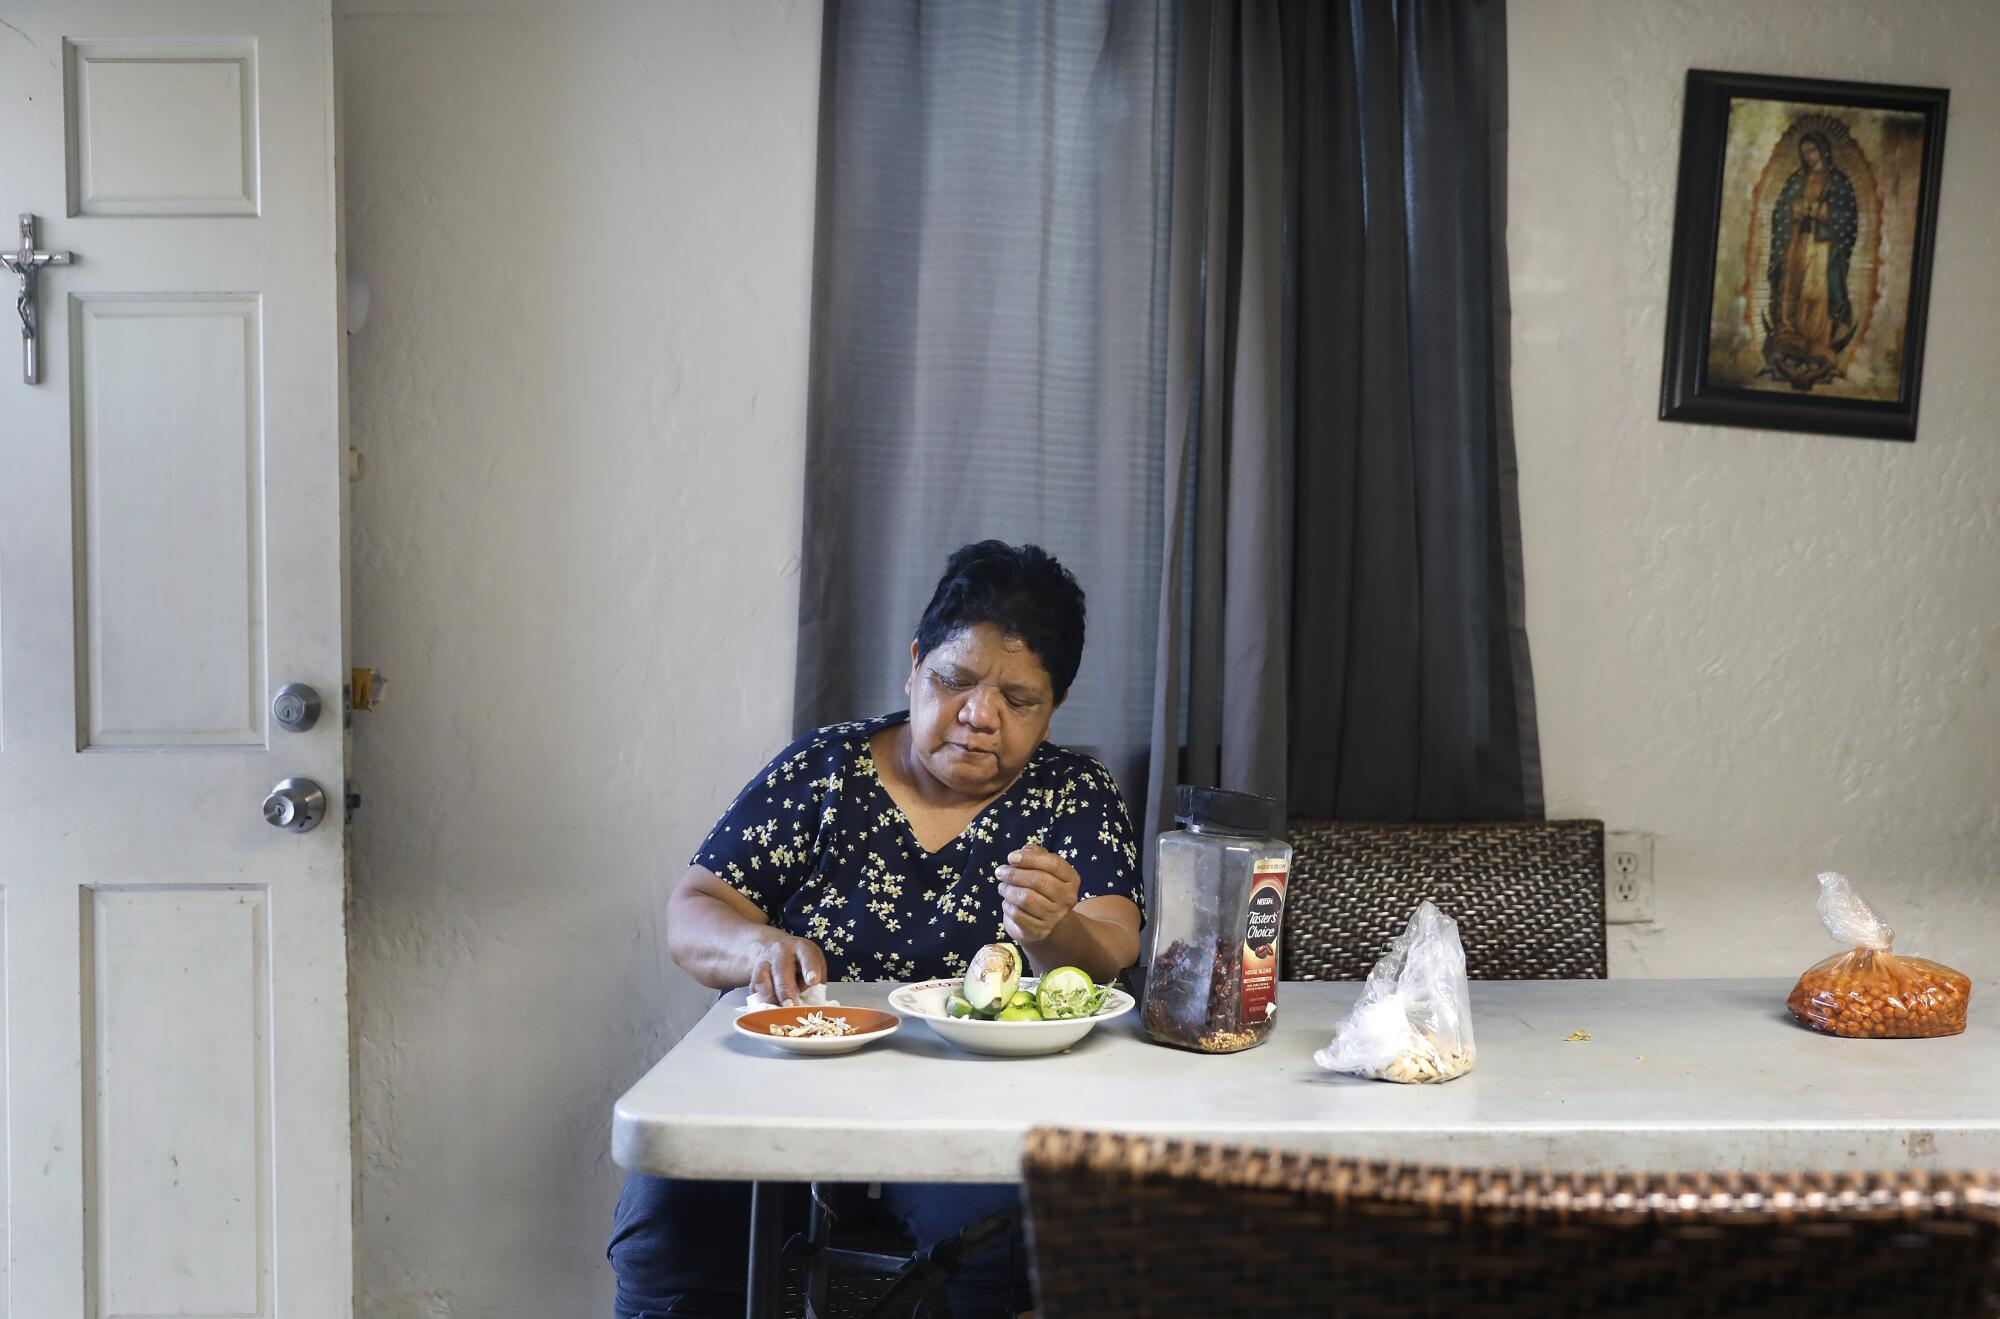 Elvira Rincon has lived in her apartment for more than three decades.